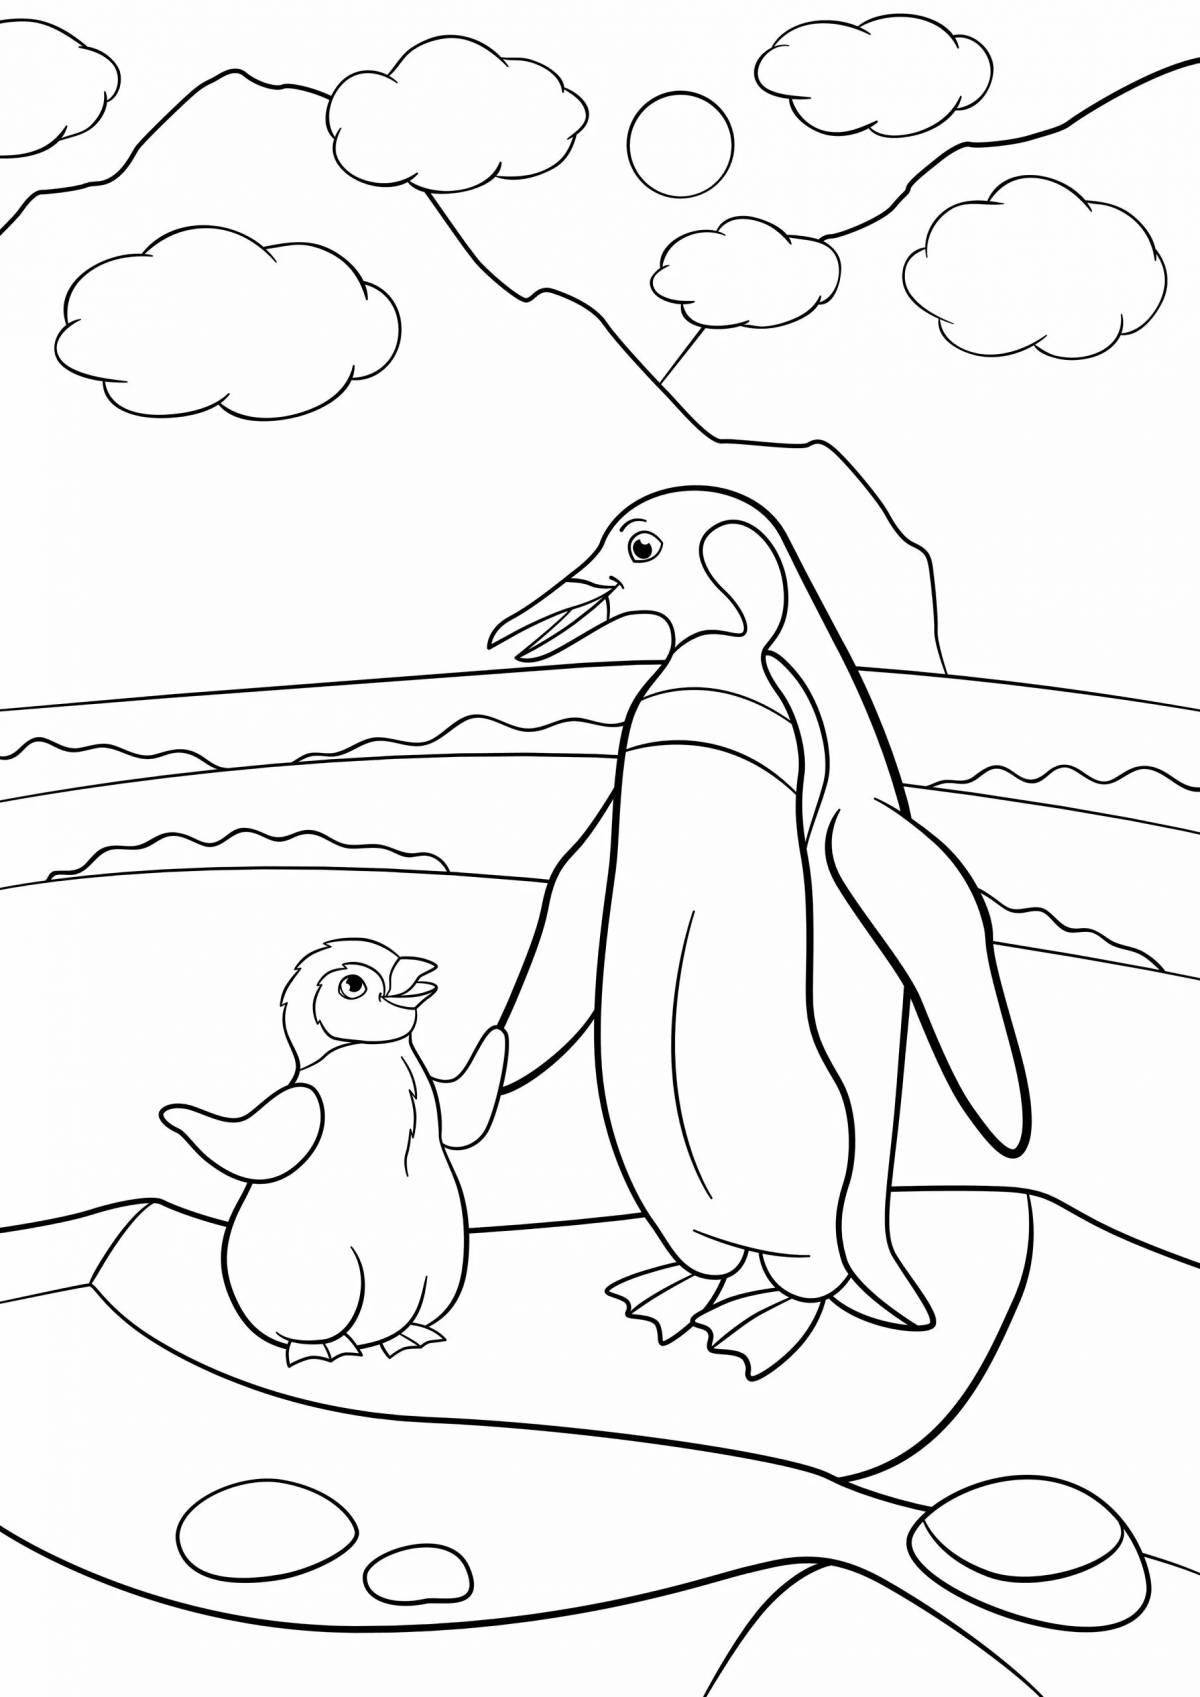 Amazing Antarctic coloring book for kids